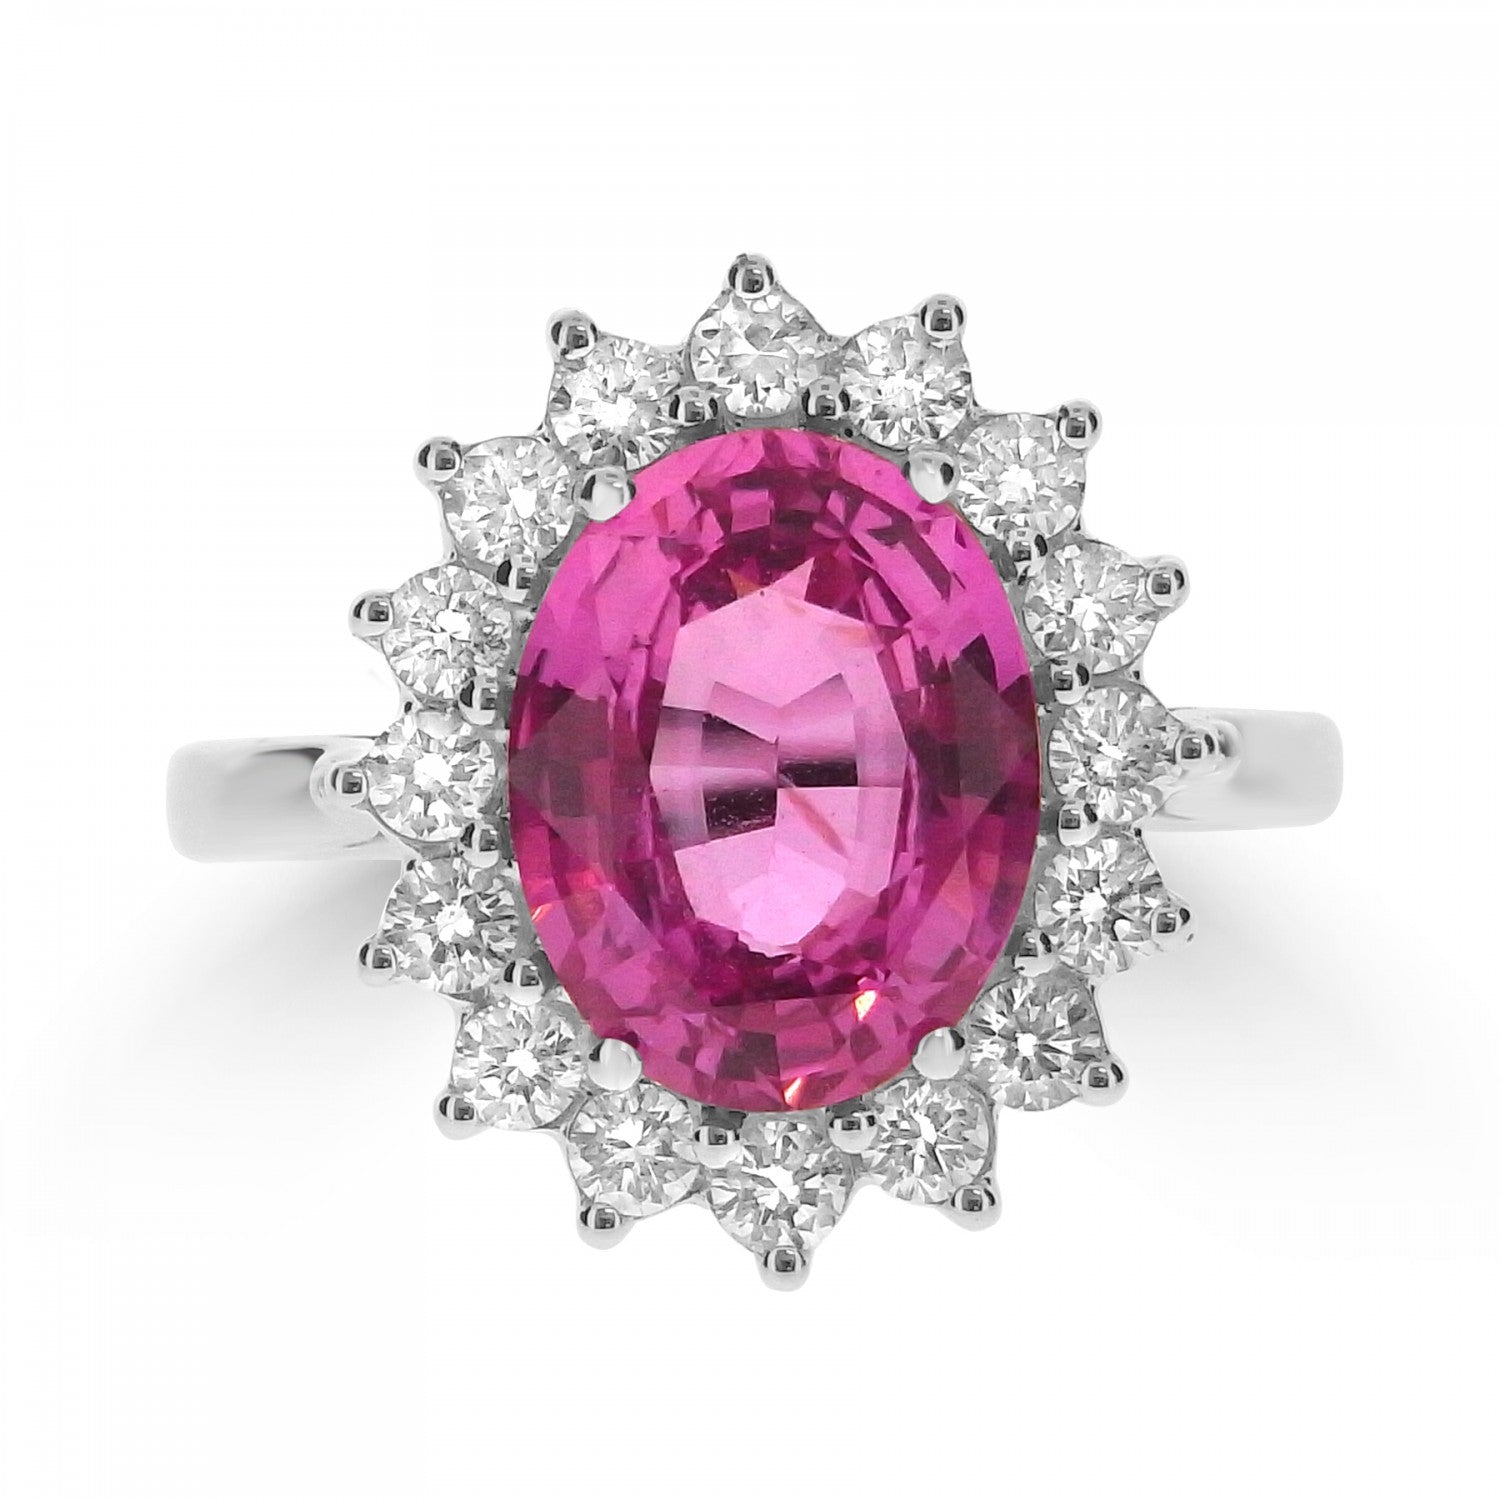 OVAL CUT PINK SAPPHIRE CLUSTER ENGAGEMENT RING